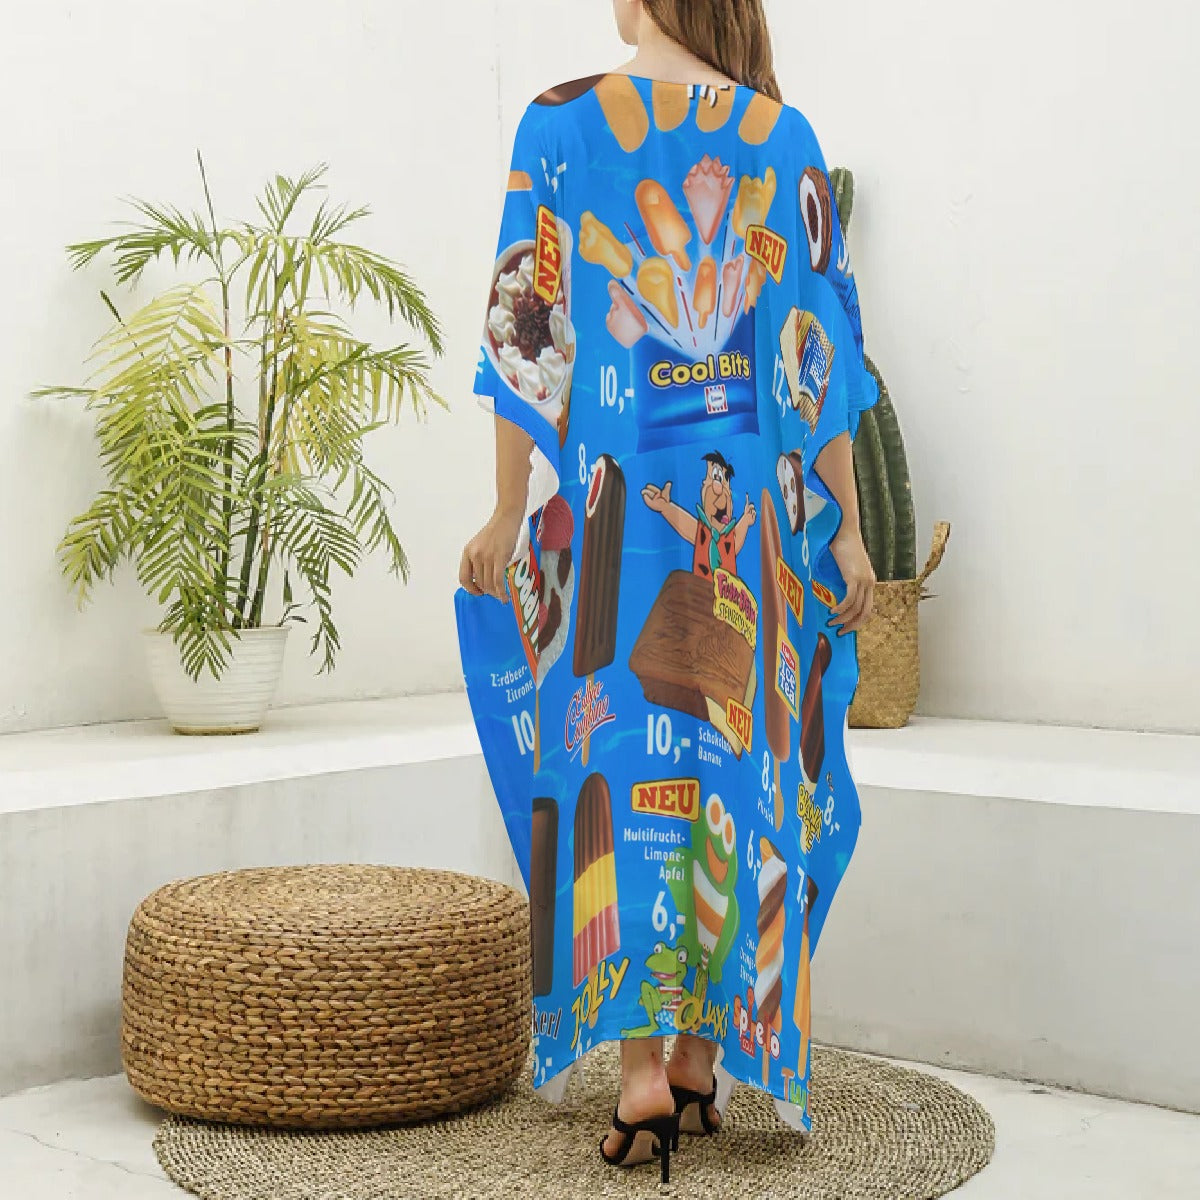 Flowing and comfortable kaftan robe perfect for summer days